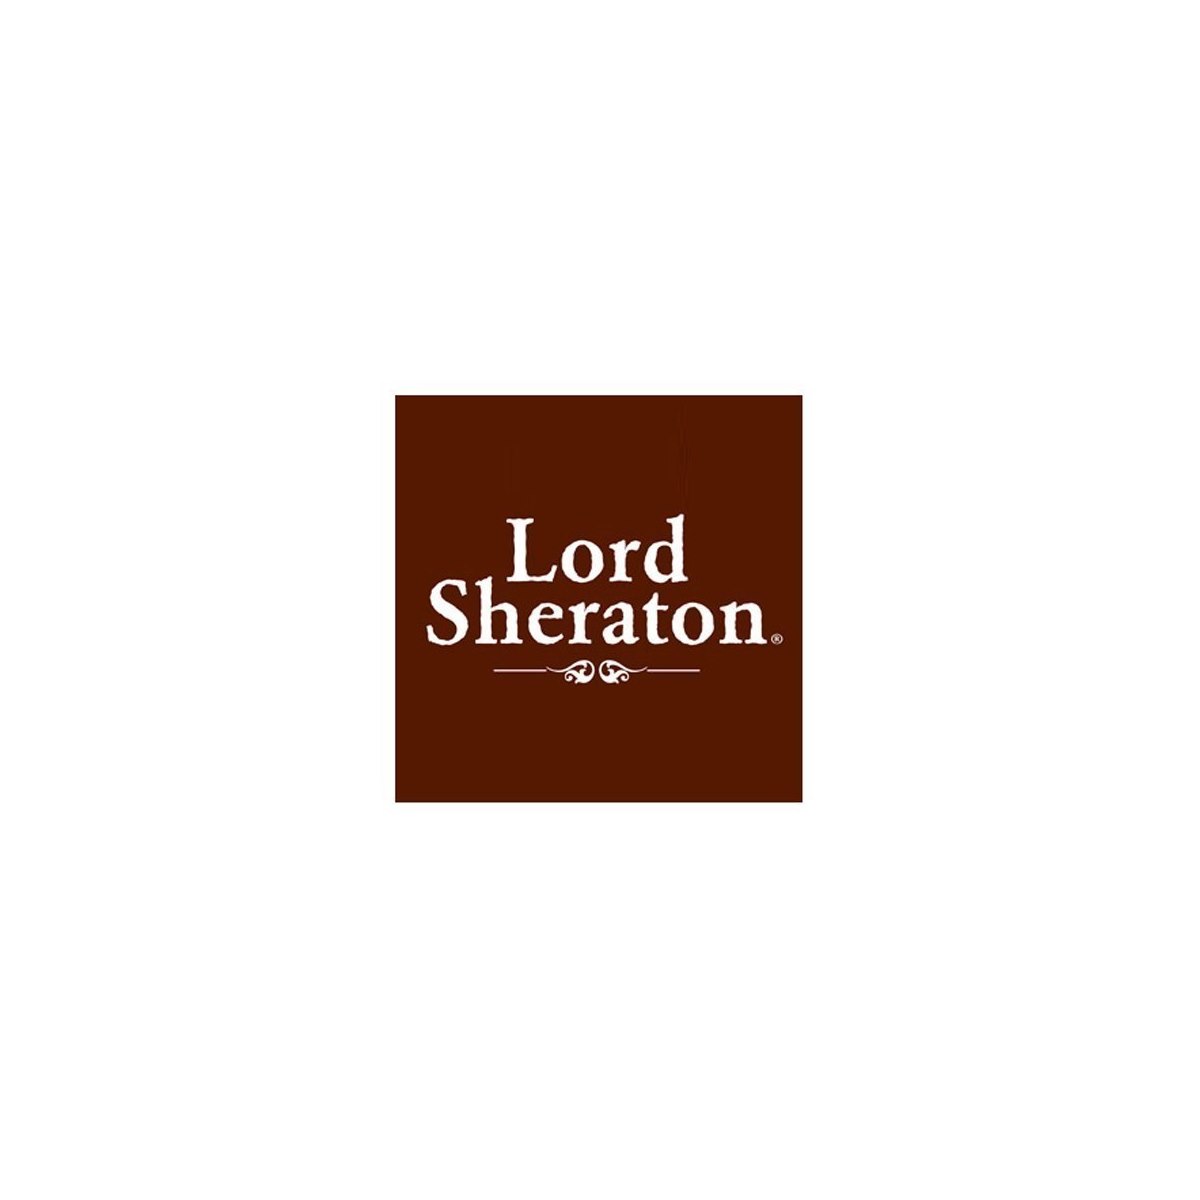 Where to Buy Lord Sheraton Products